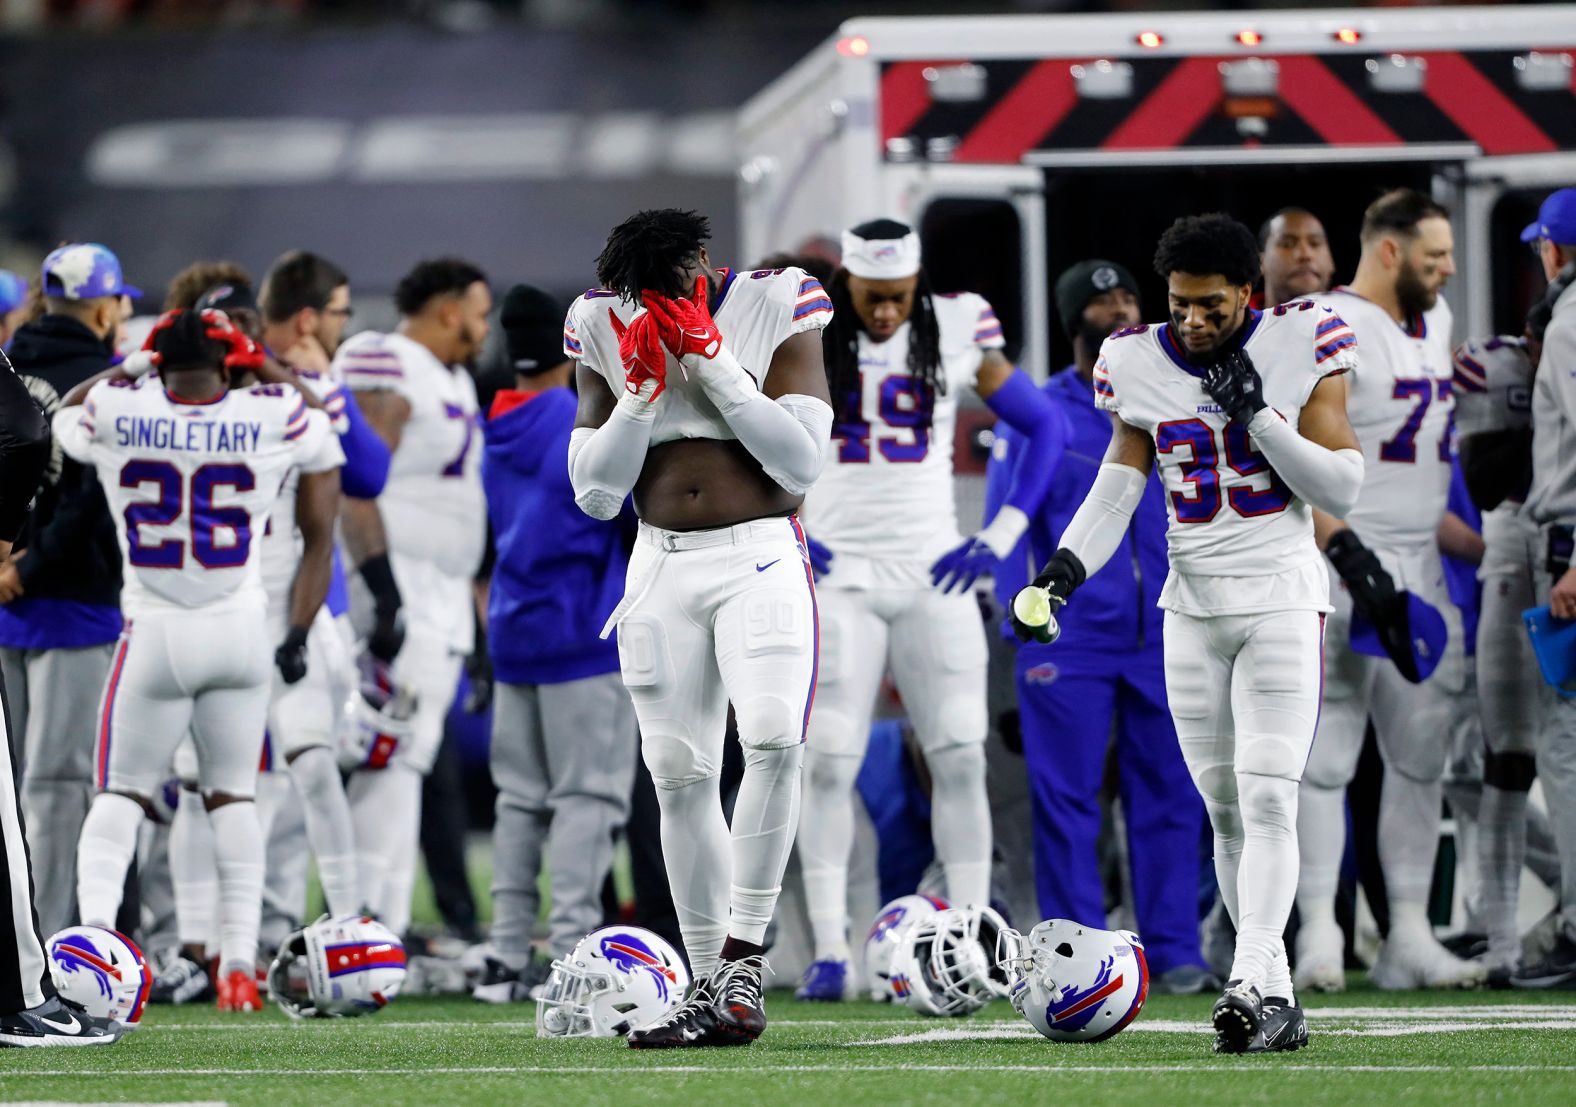 Buffalo Bills players react after teammate <a href="index.php?page=&url=http%3A%2F%2Fwww.cnn.com%2F2023%2F01%2F02%2Ffootball%2Fdamar-hamlin-buffalo-bills-collapse%2Findex.html" target="_blank">Damar Hamlin</a> collapsed on the field during the first quarter of the Monday Night Football game against the Cincinnati Bengals. Hamlin was administered CPR before being transported off the field in an ambulance.